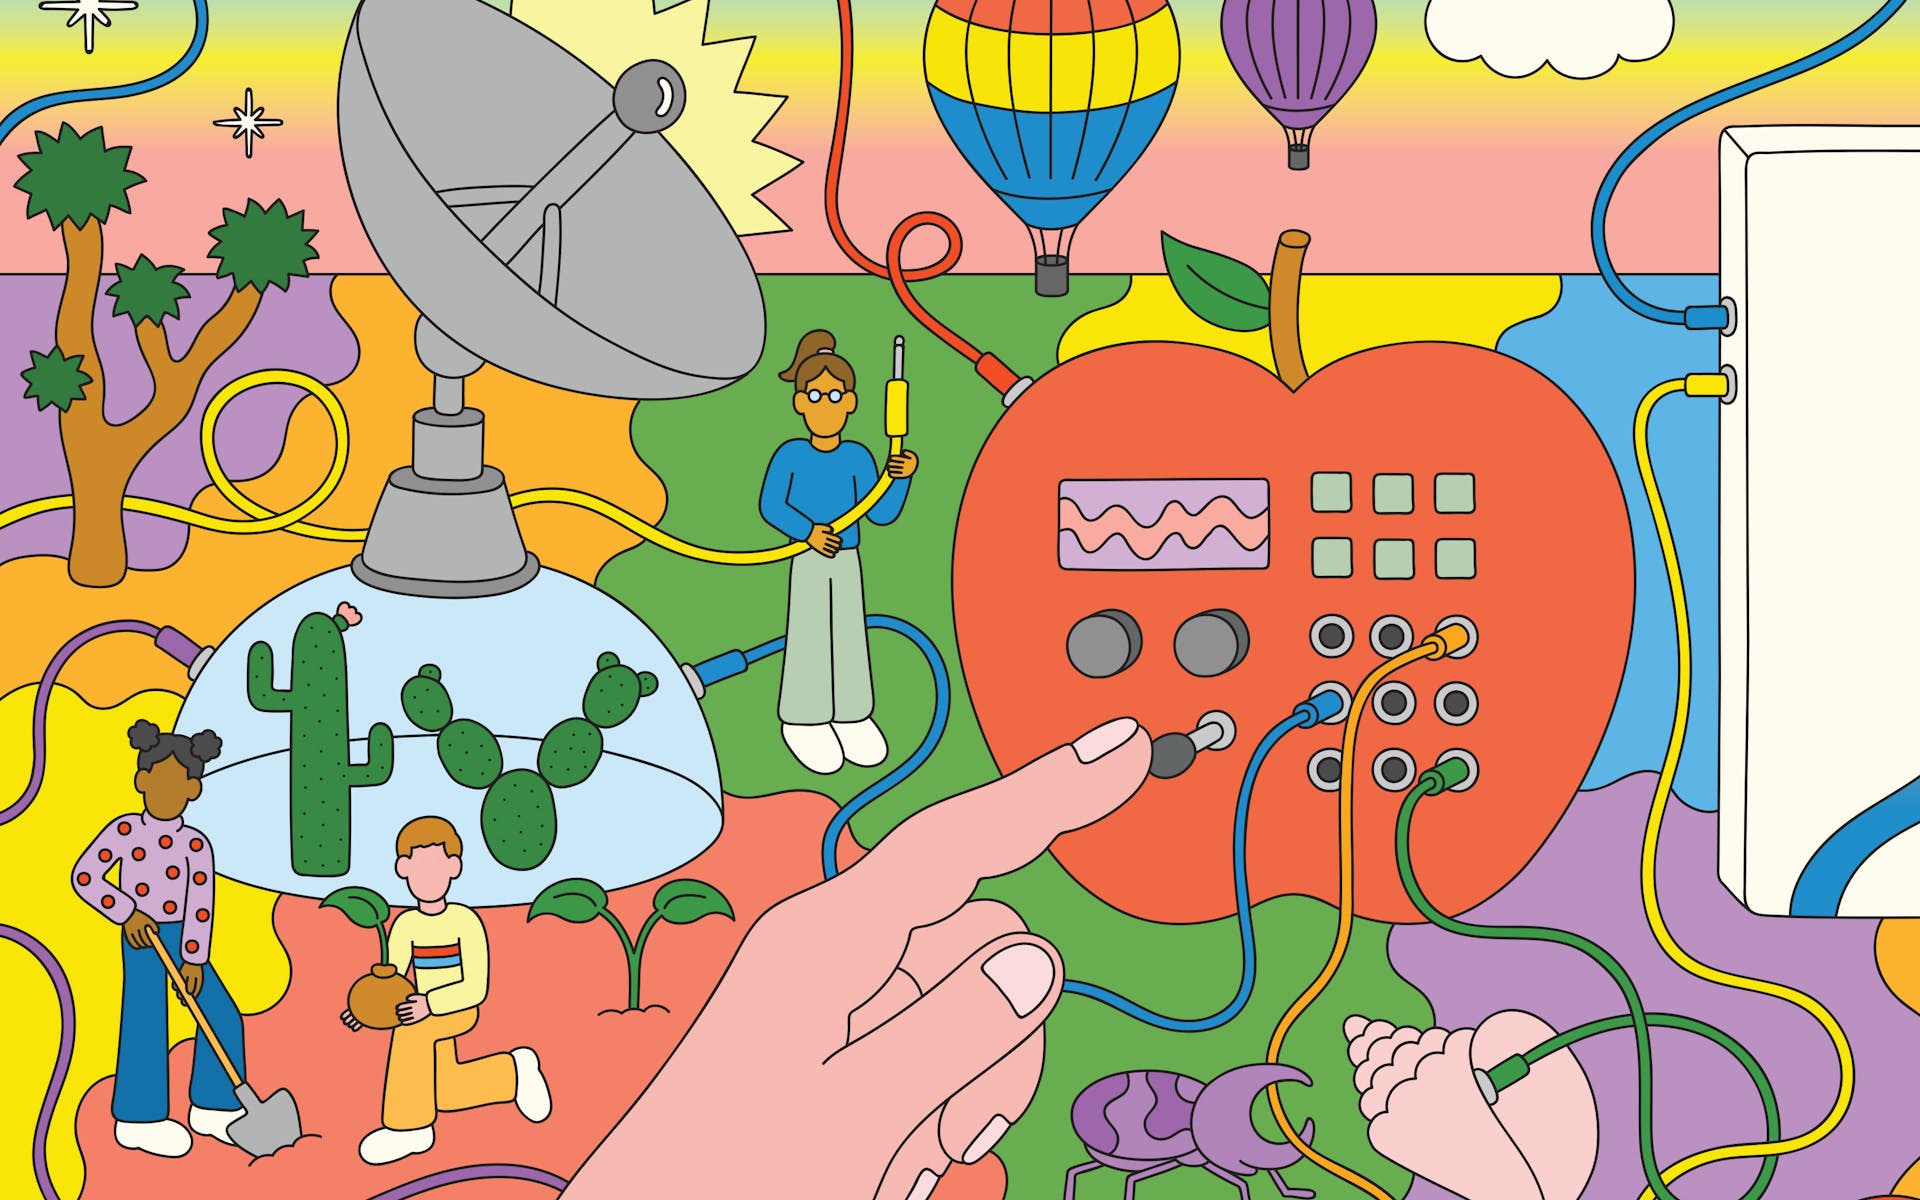 Colorful illustration depicting fantastical setting including electronic console embedded in a giant apple, a satellite, children planting cactii, hot air balloons, a beetle, a plug connecting to a conch shell, etc.